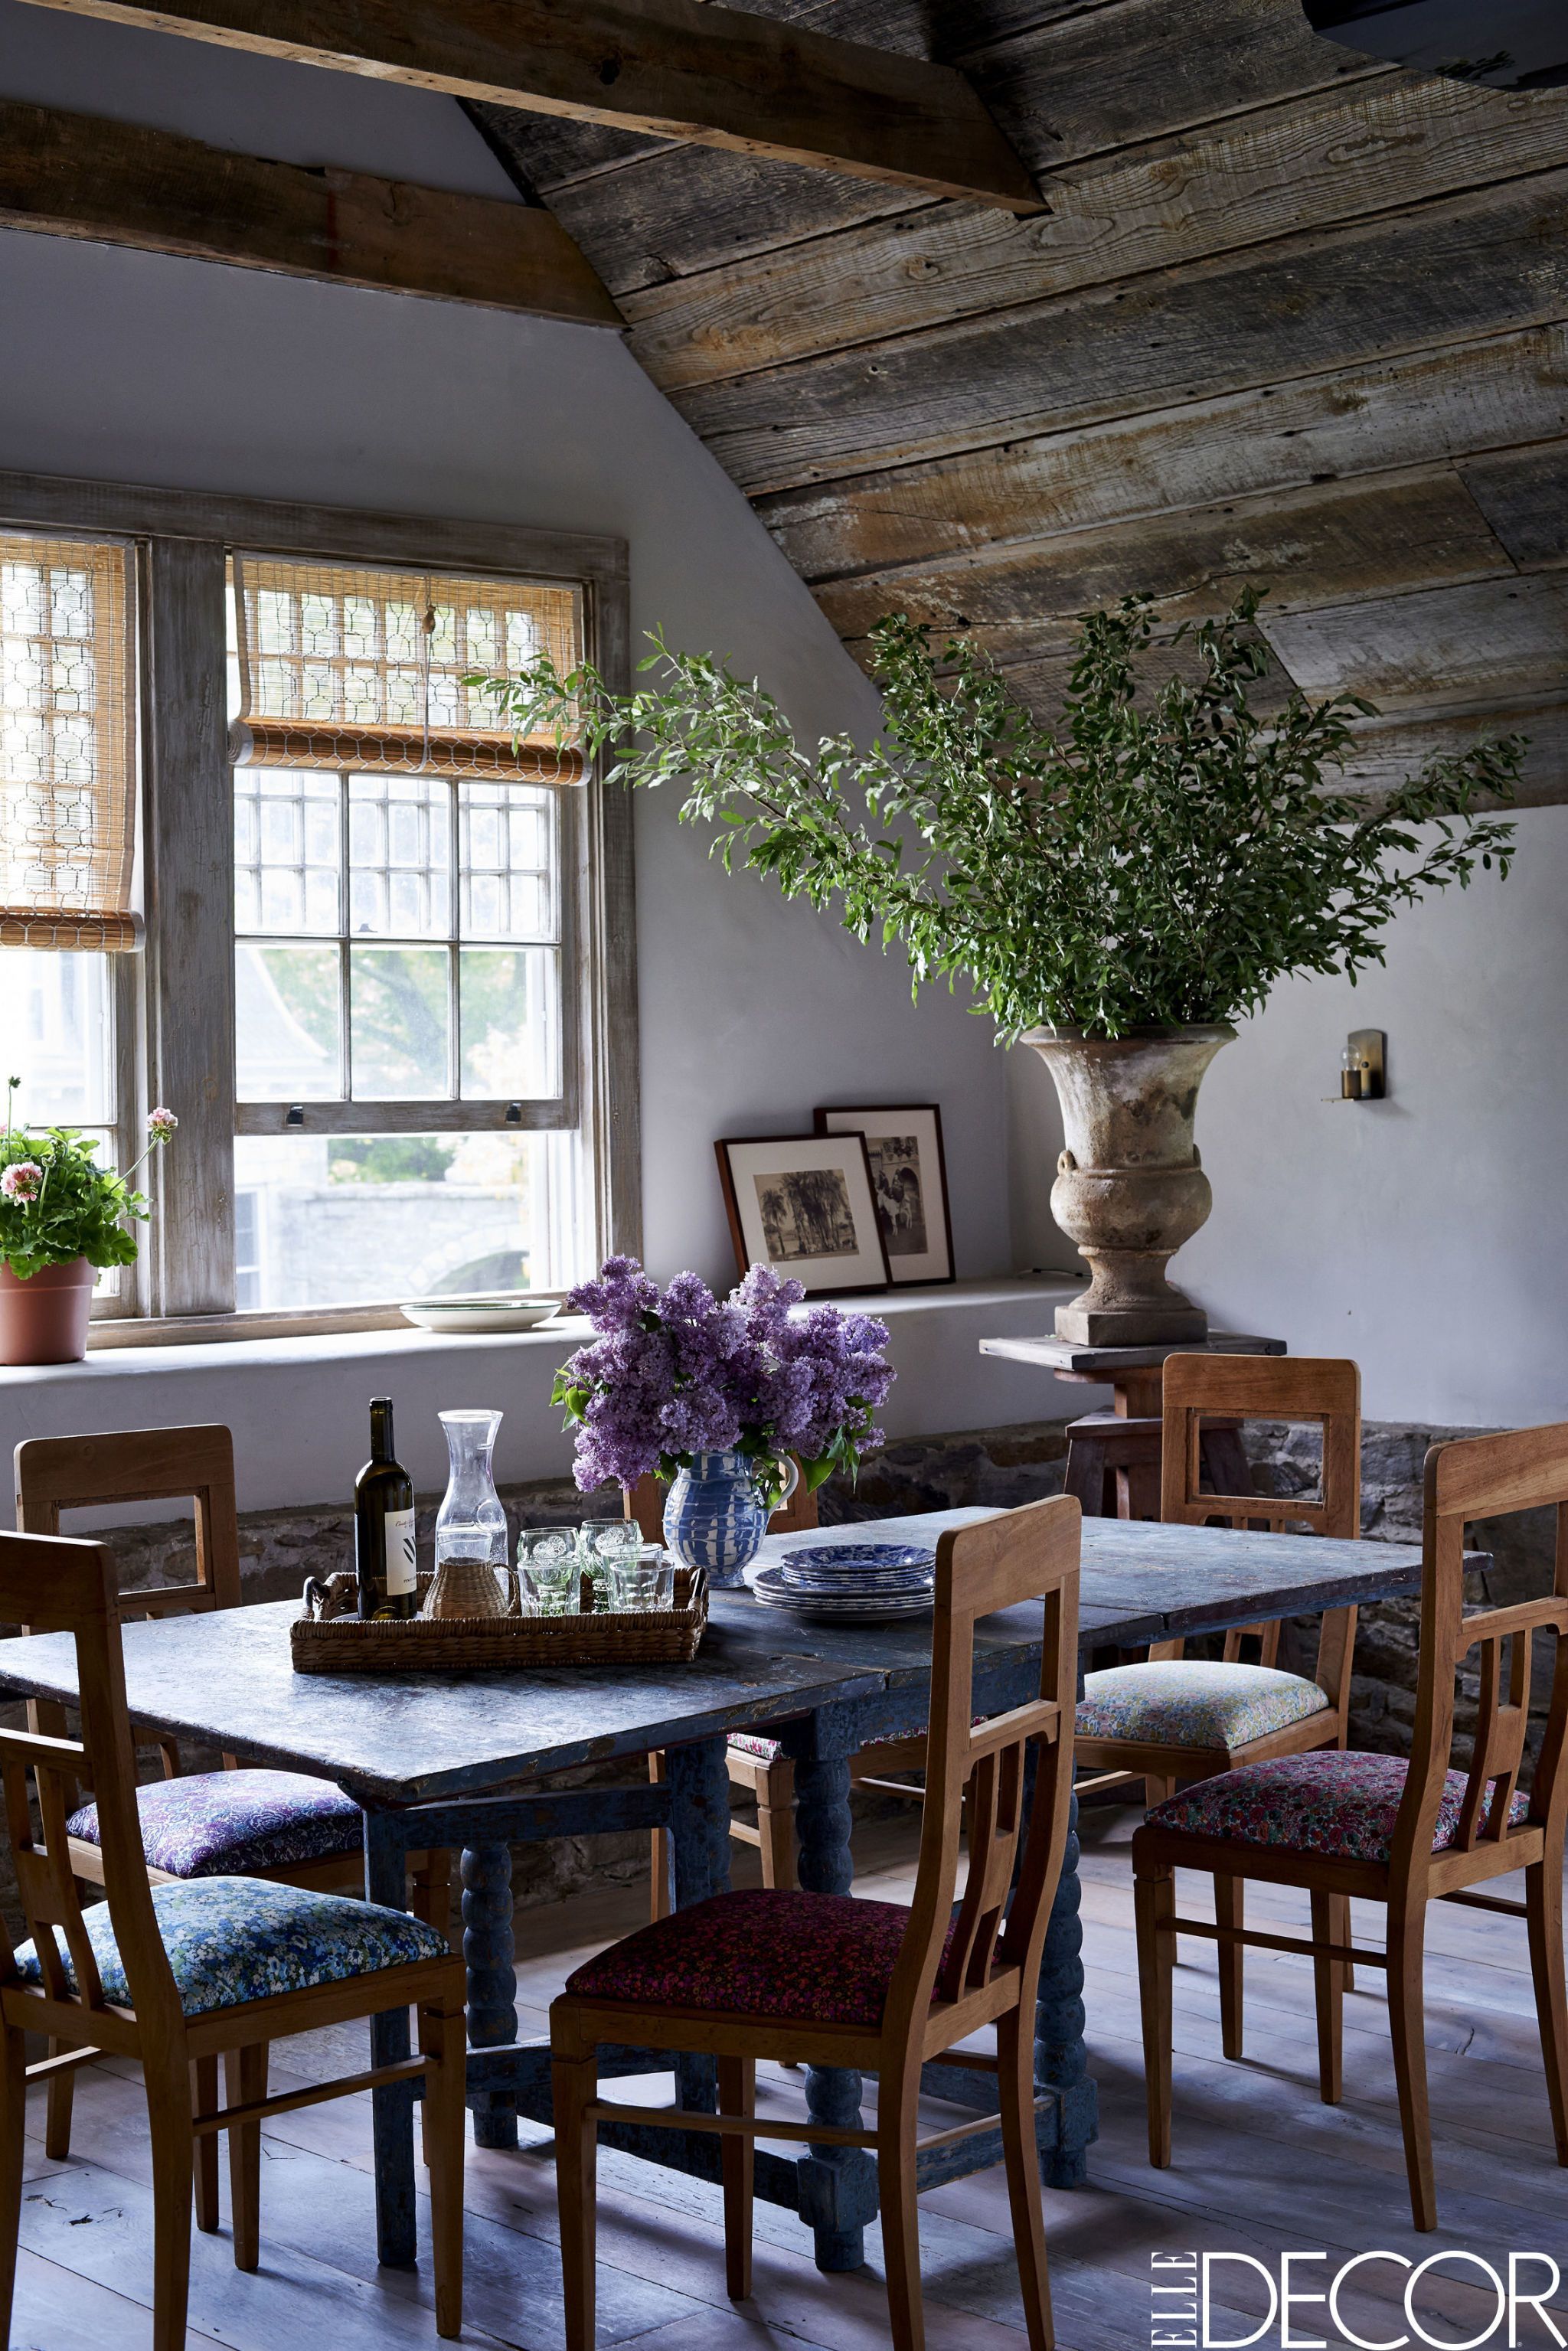 25 Rustic Dining Room Ideas Farmhouse, Country Style Dining Room Sets